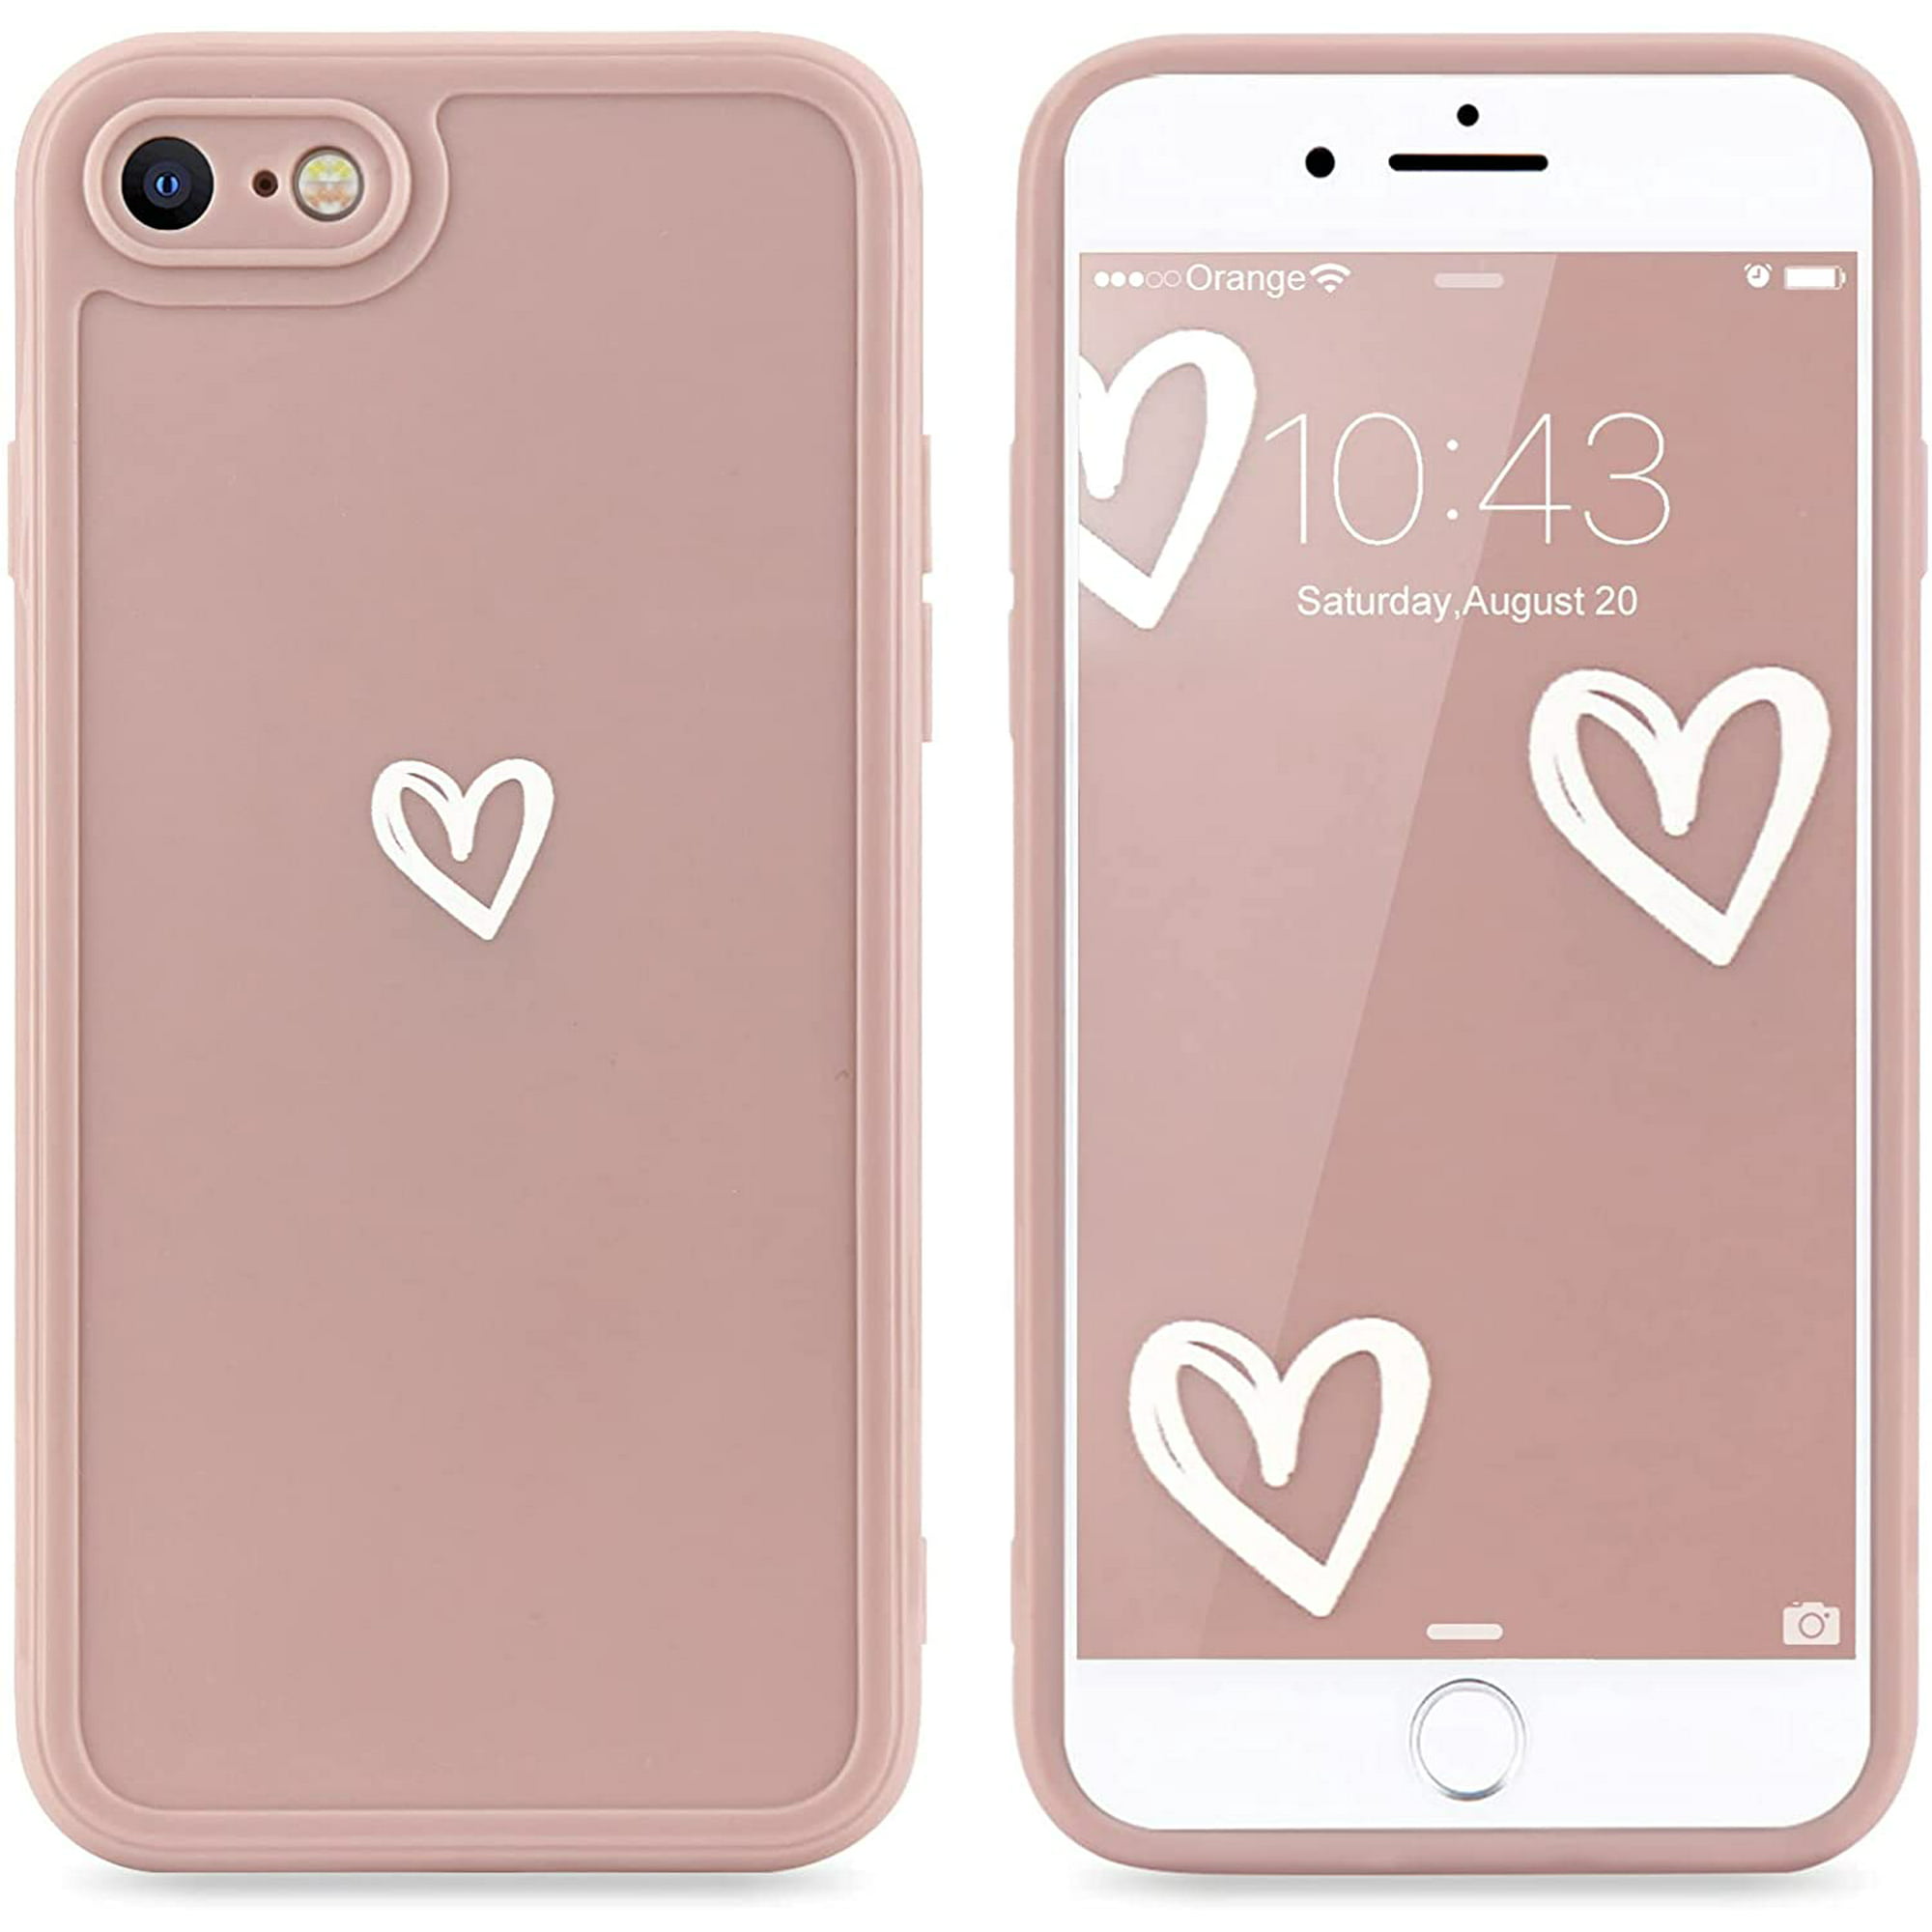 For Compatible With Iphone 7 Plus Case Iphone 8 Plus Case For Women Girls Cute Shockproof Protective Soft Tpu Phone Case With Heart Pattern Design Back Bumper Slim Cover Cases Iphone 7